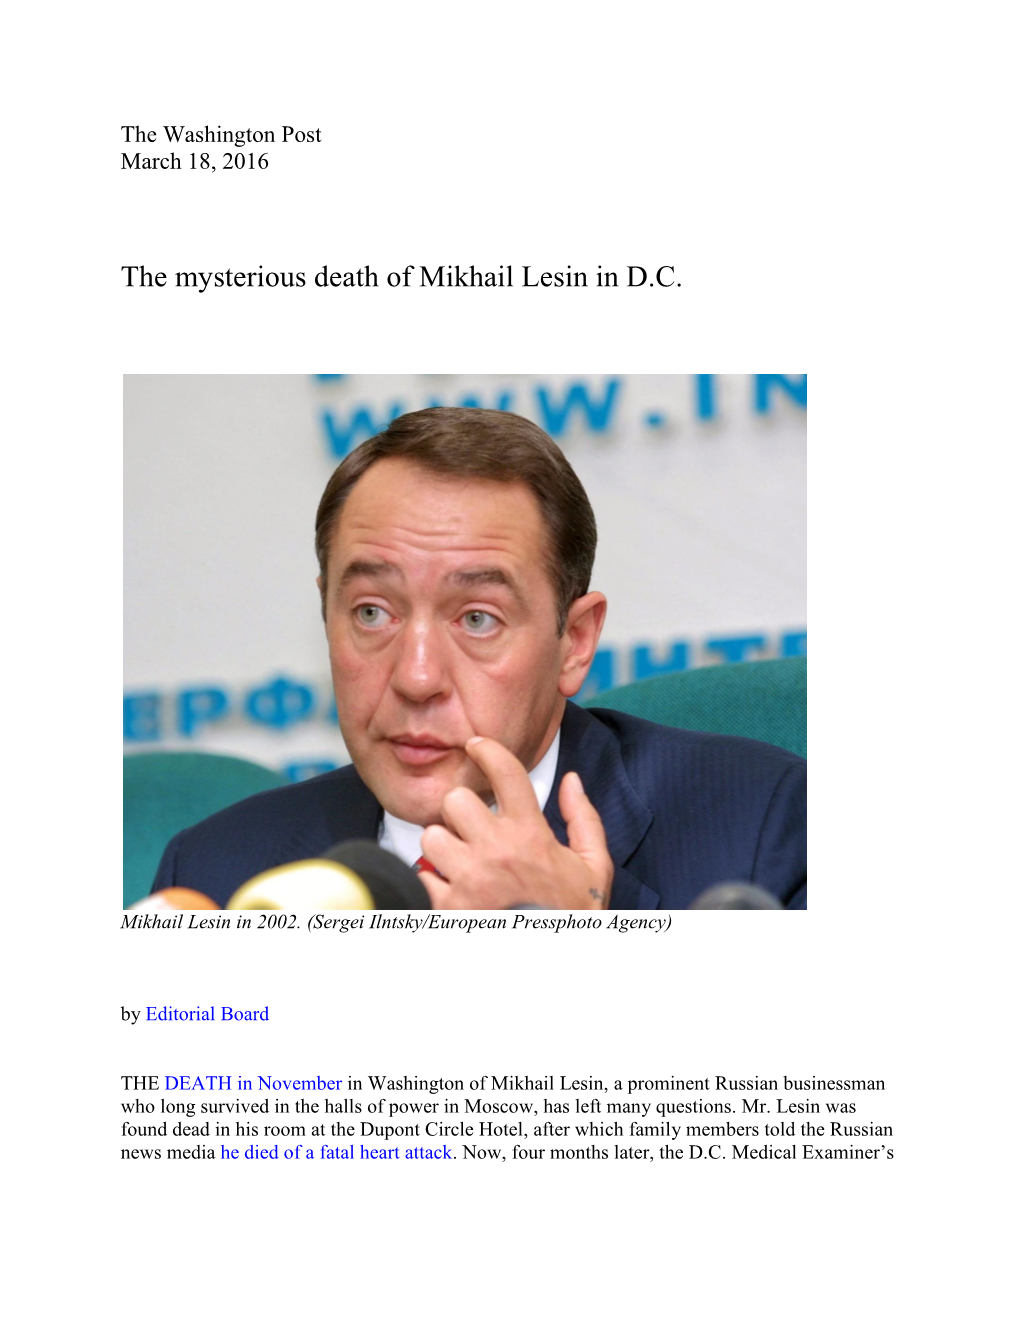 The Mysterious Death of Mikhail Lesin in D.C